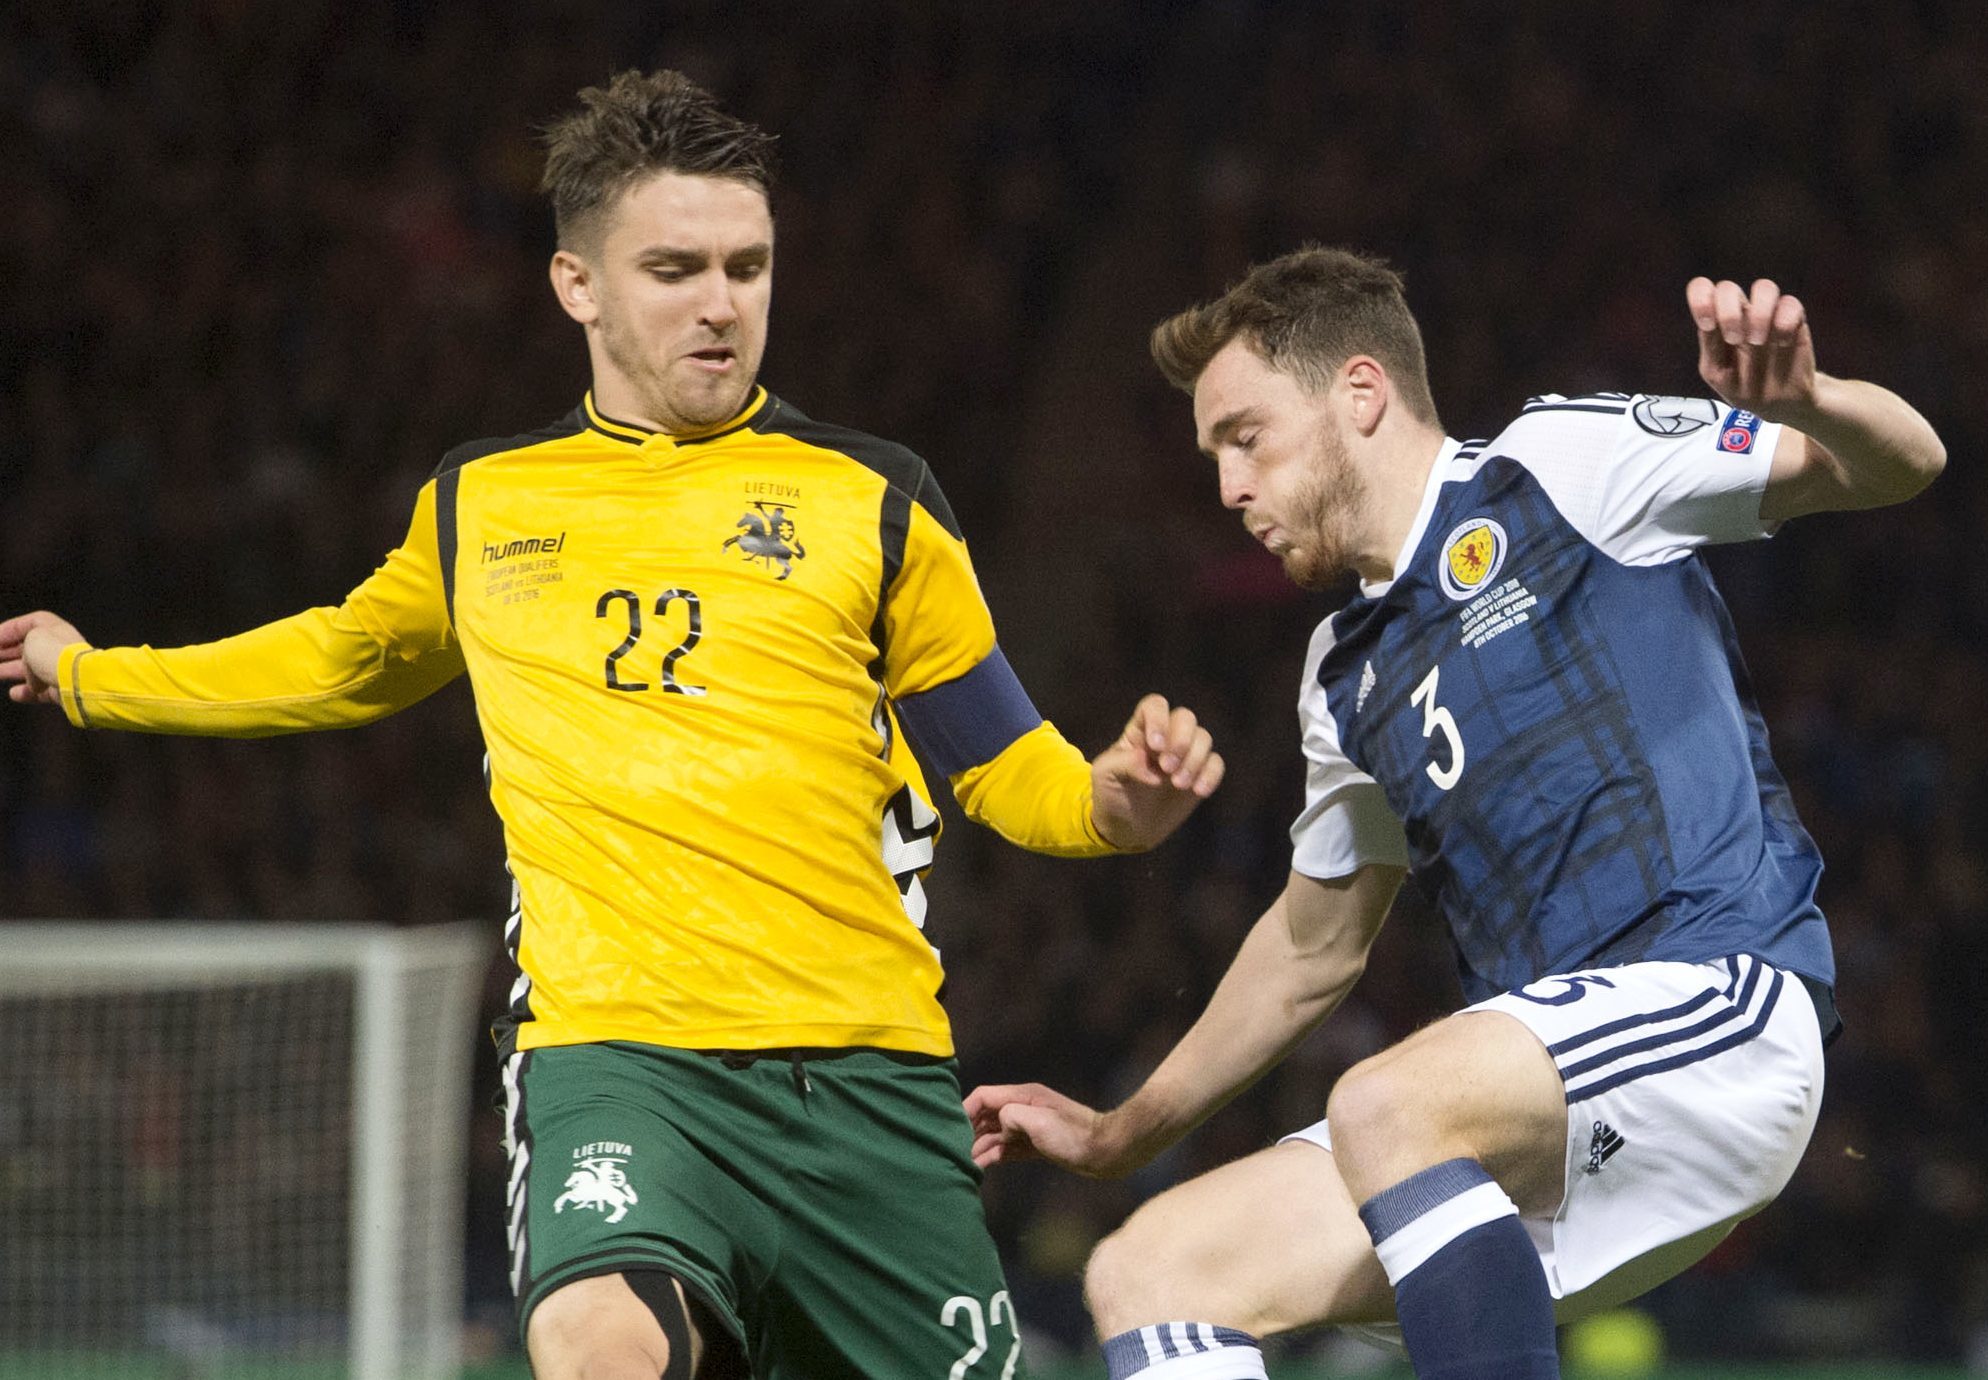 Andy Robertson competes with Lithuania's goal scorer Fiodor Cernych